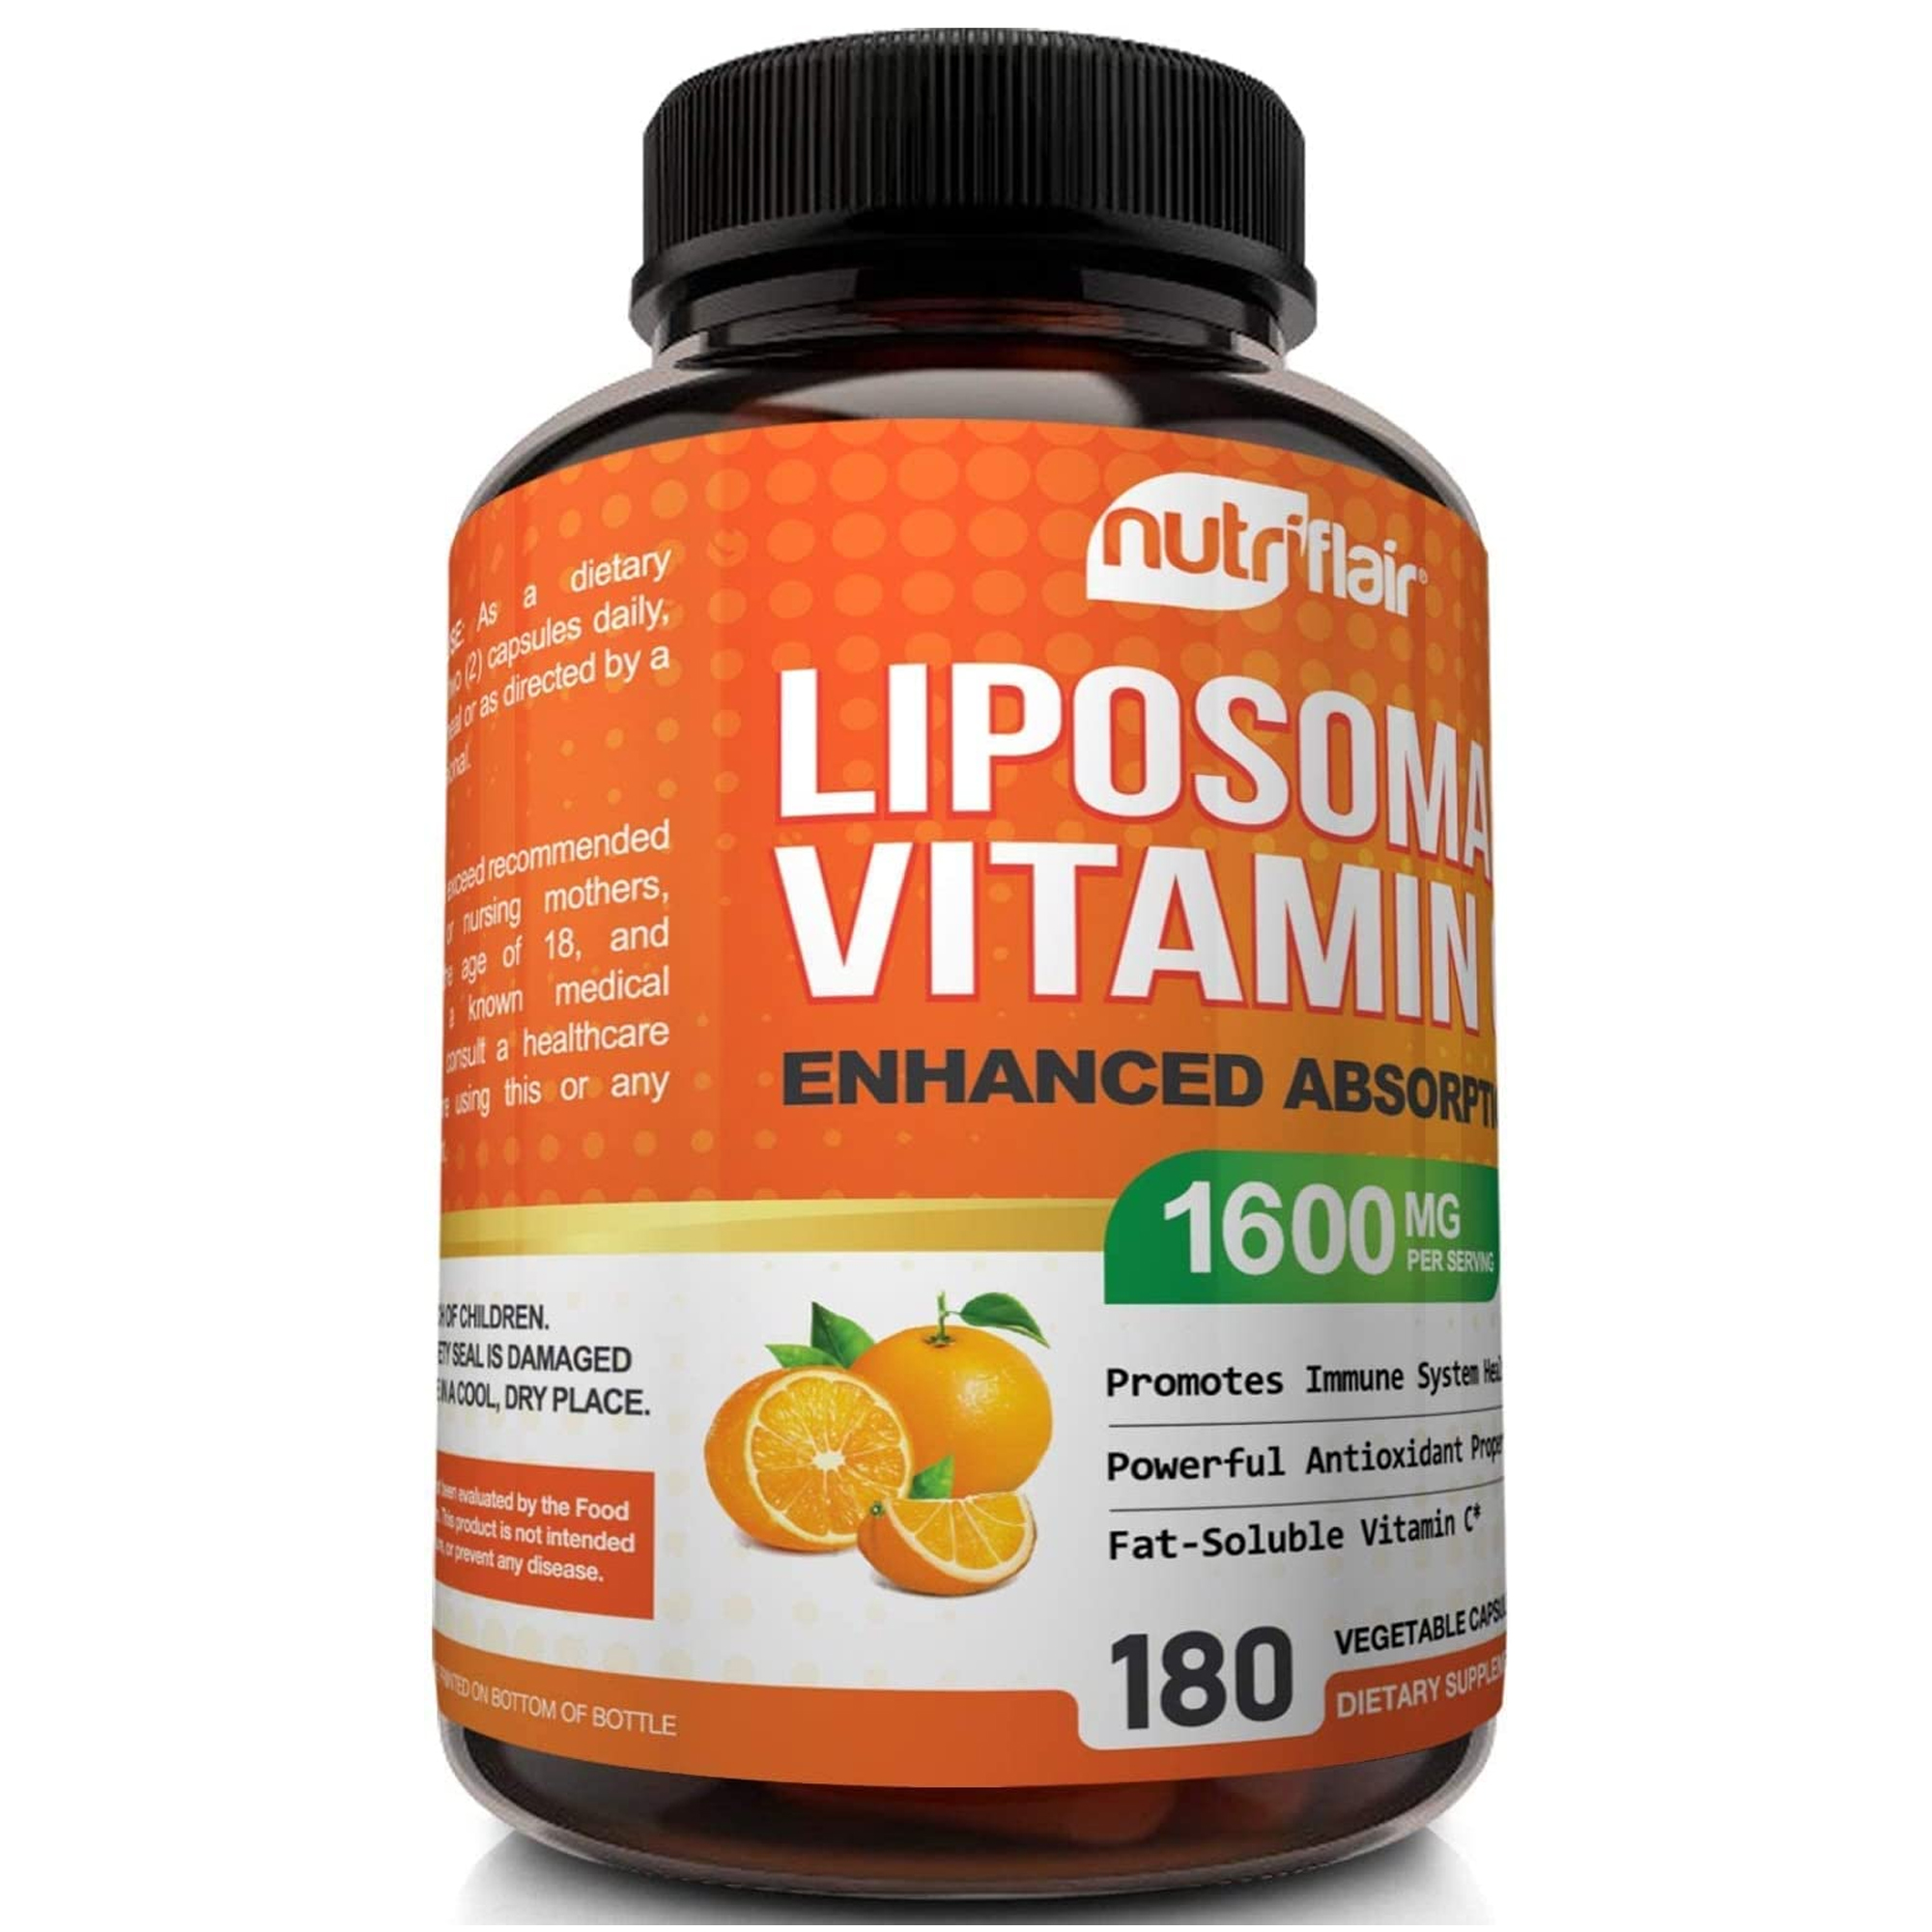 NutriFlair Liposomal Vitamin C 1600mg, 180 Capsules - High Absorption, Fat Soluble VIT C, Antioxidant Supplement, Higher Bioavailability Immune System Support & Collagen Booster, Non-GMO, Vegan Pills - image 2 of 7